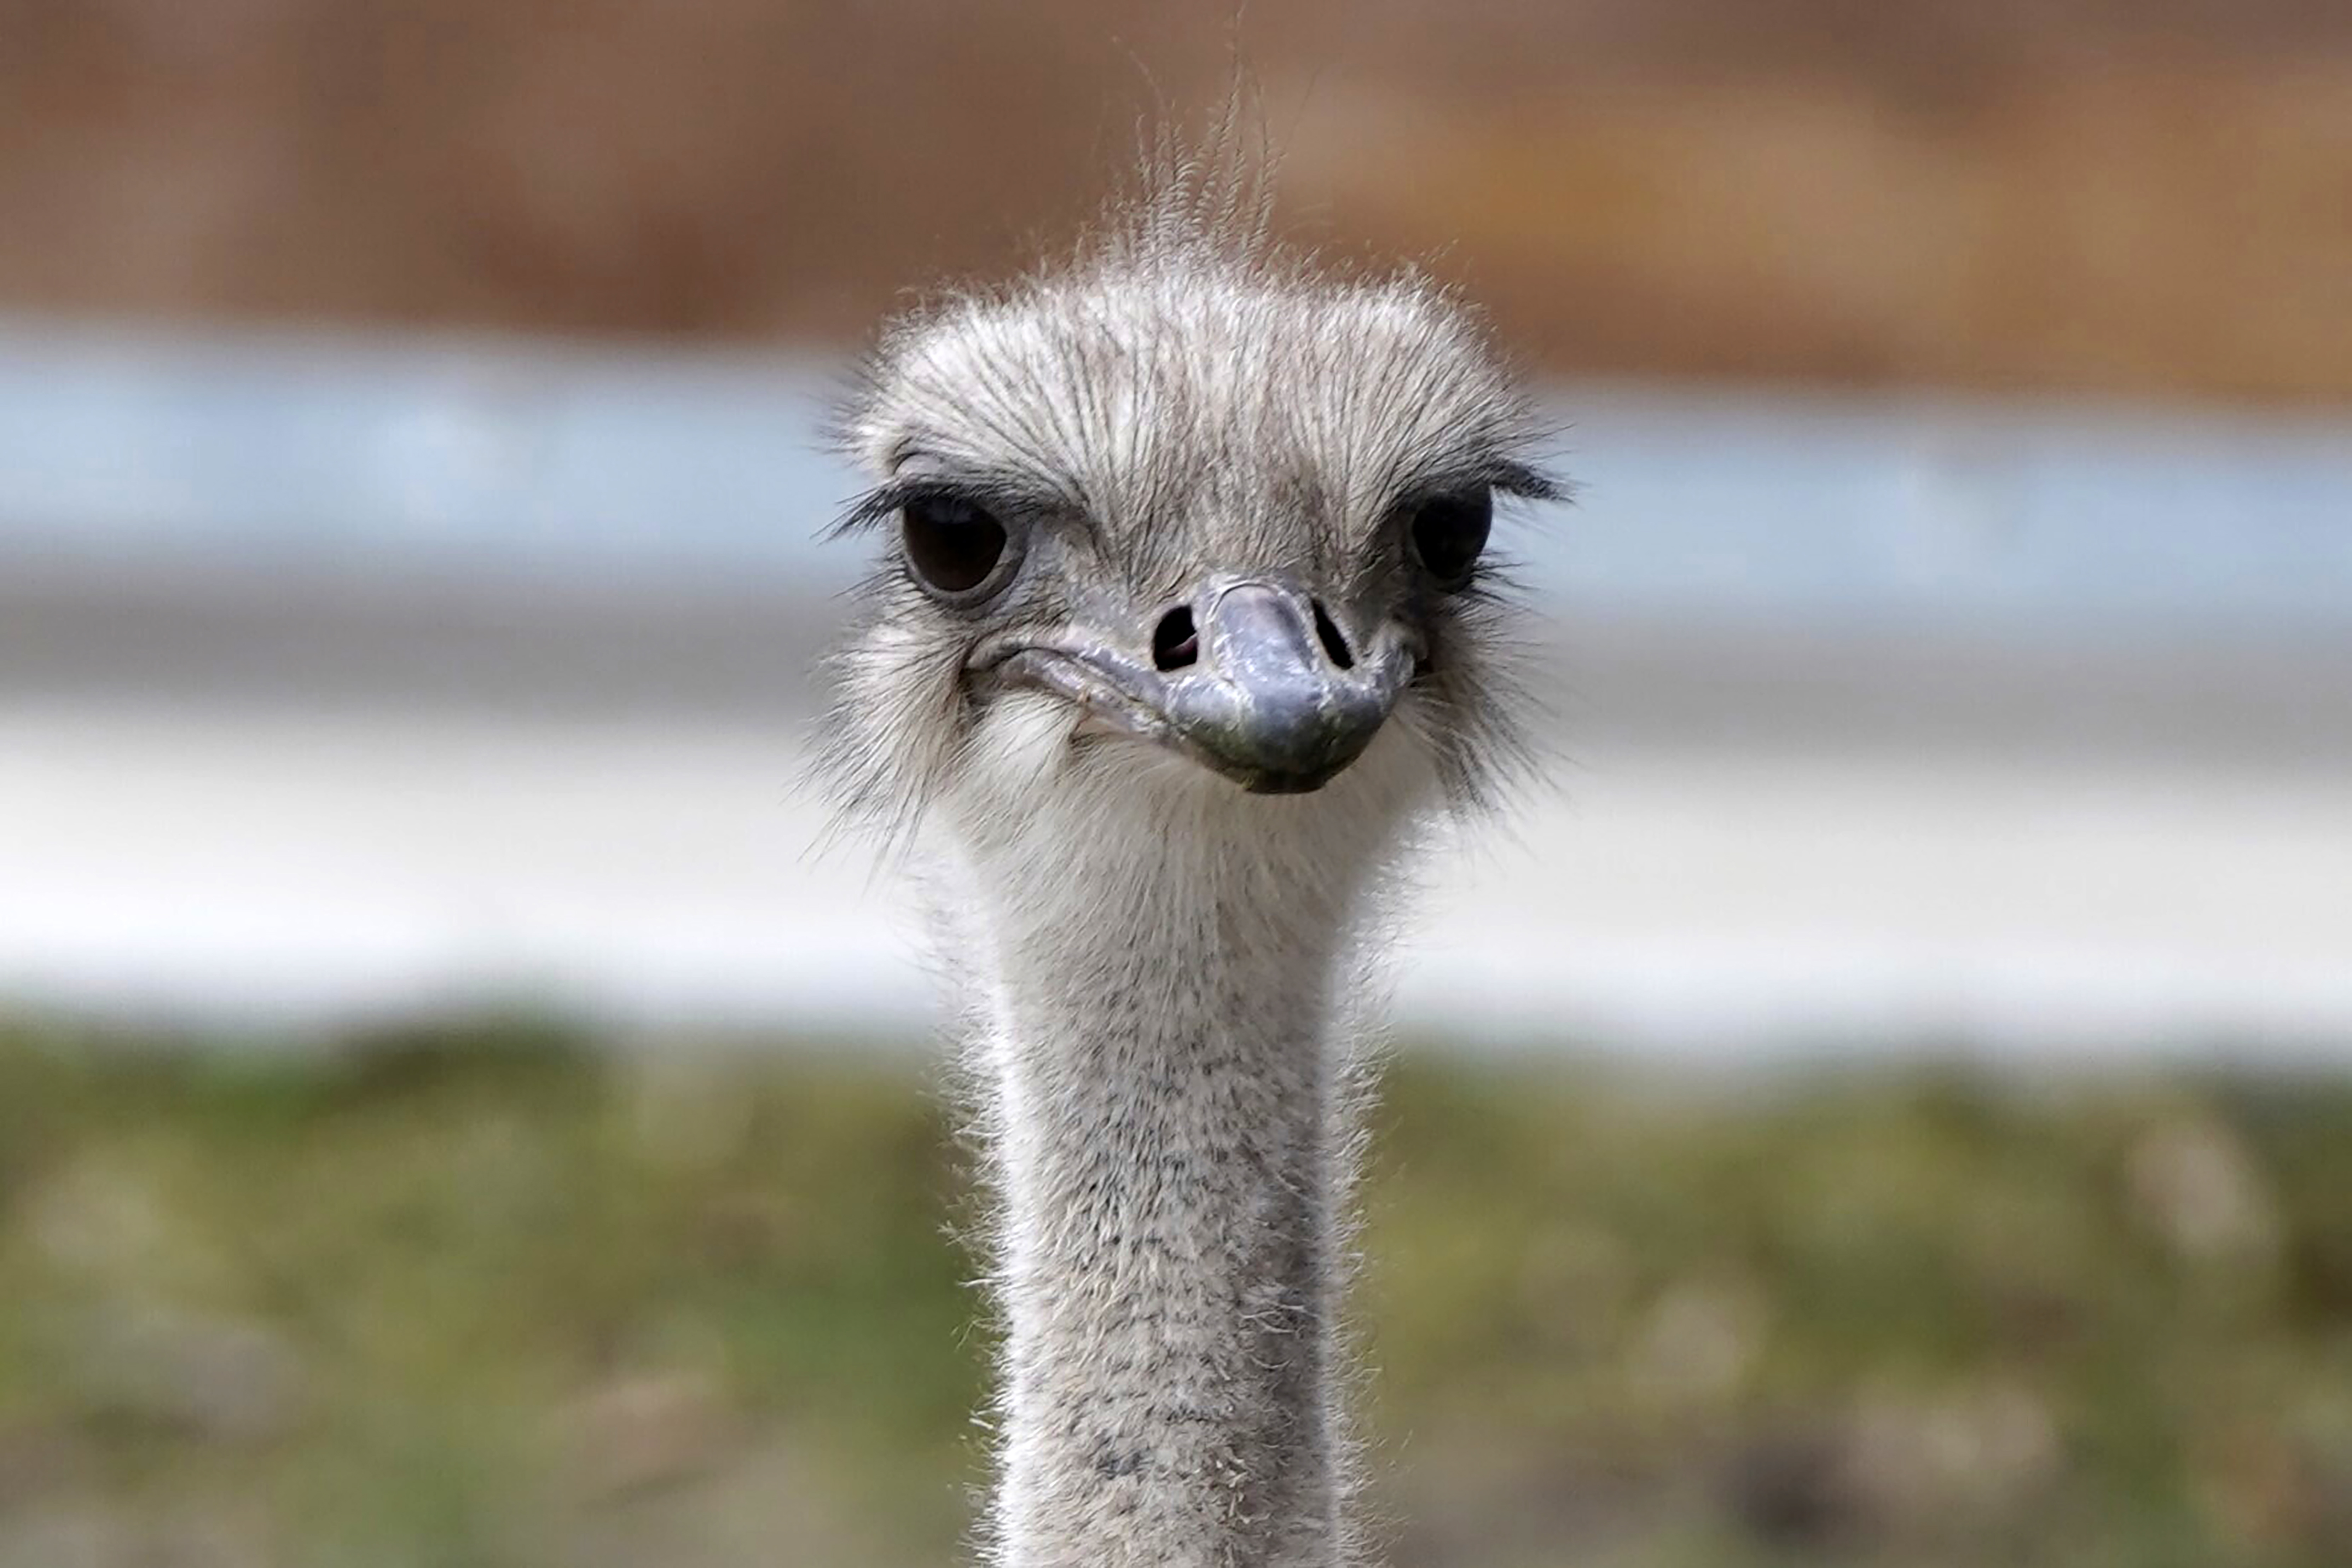 This image provided by the Topeka Zoo shows Karen, an ostrich at the Topeka Zoo in Topeka, Kan.